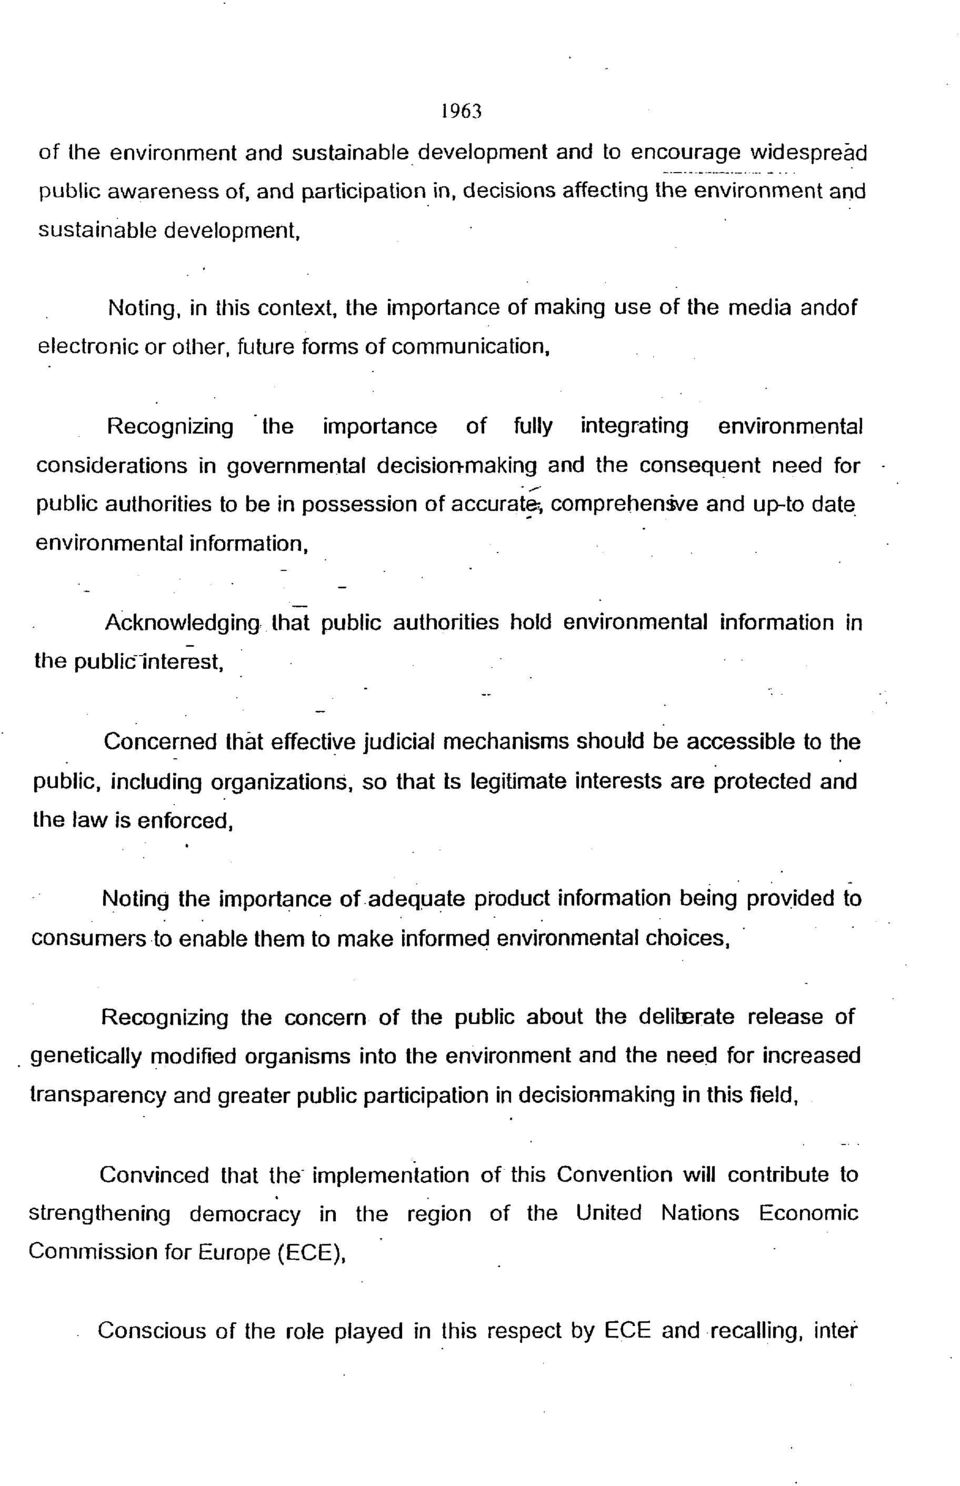 governmental decision-making and the consequent need for public authorities to be in possession of accurate; comprehensve and up-to date environmental information, Acknowledging that public